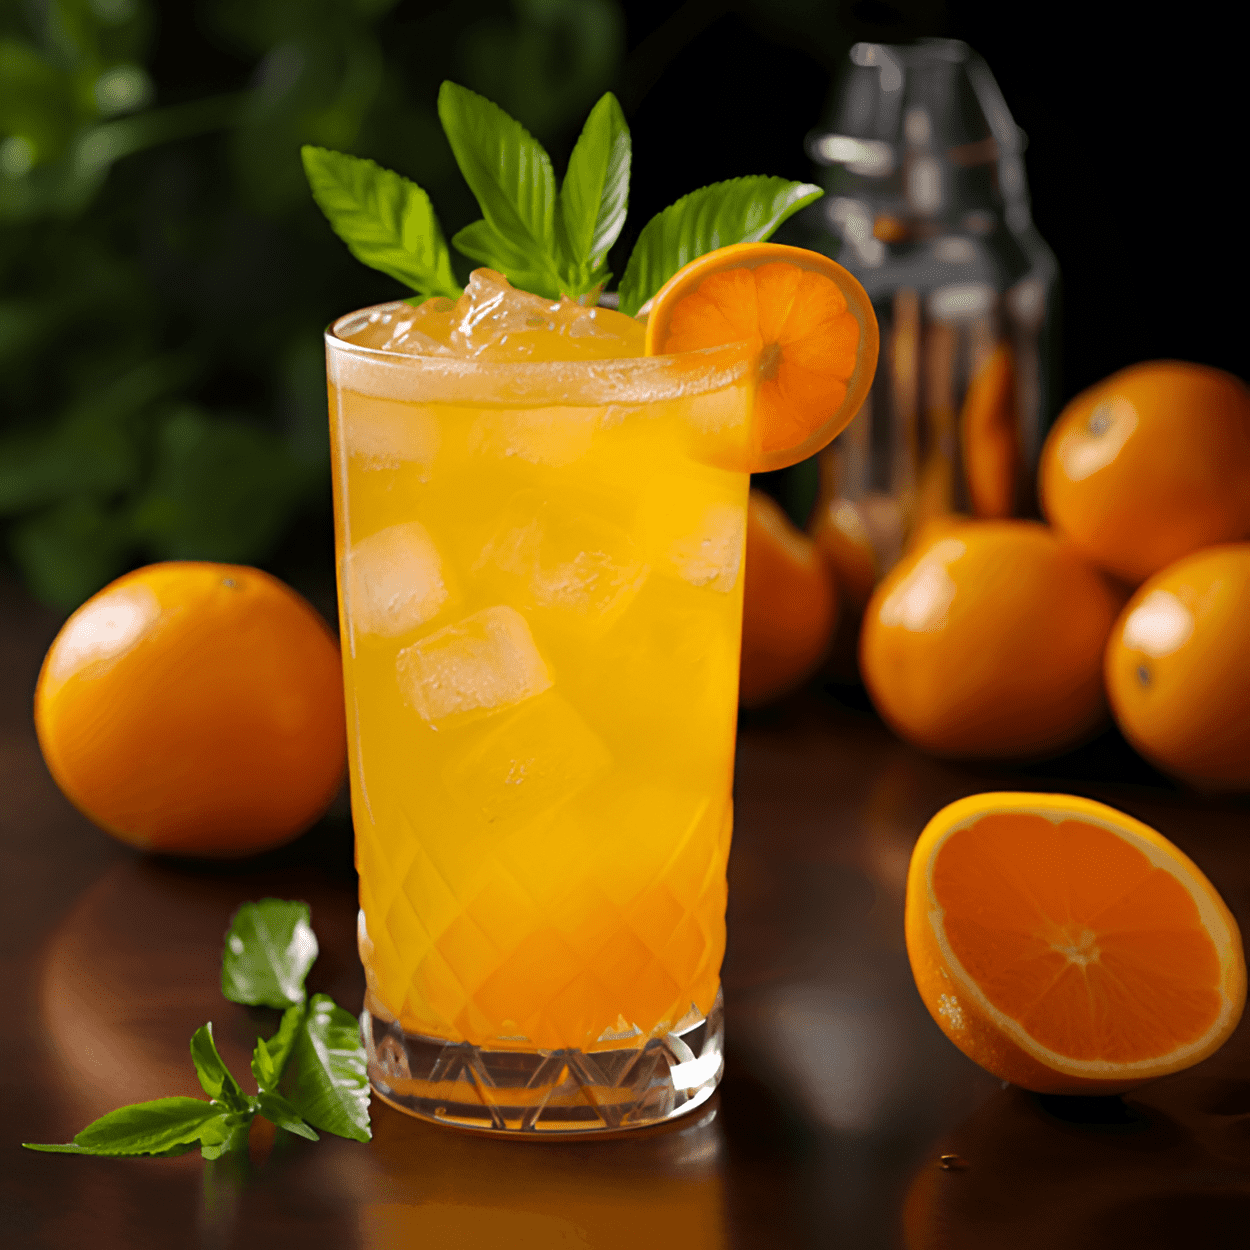 Kumquat Cocktail Recipe - The Kumquat Cocktail offers a unique blend of sweet, sour, and slightly bitter flavors. The sweetness of the sugar and the sourness of the lime juice perfectly balance the slight bitterness of the kumquat, resulting in a refreshing and invigorating cocktail.